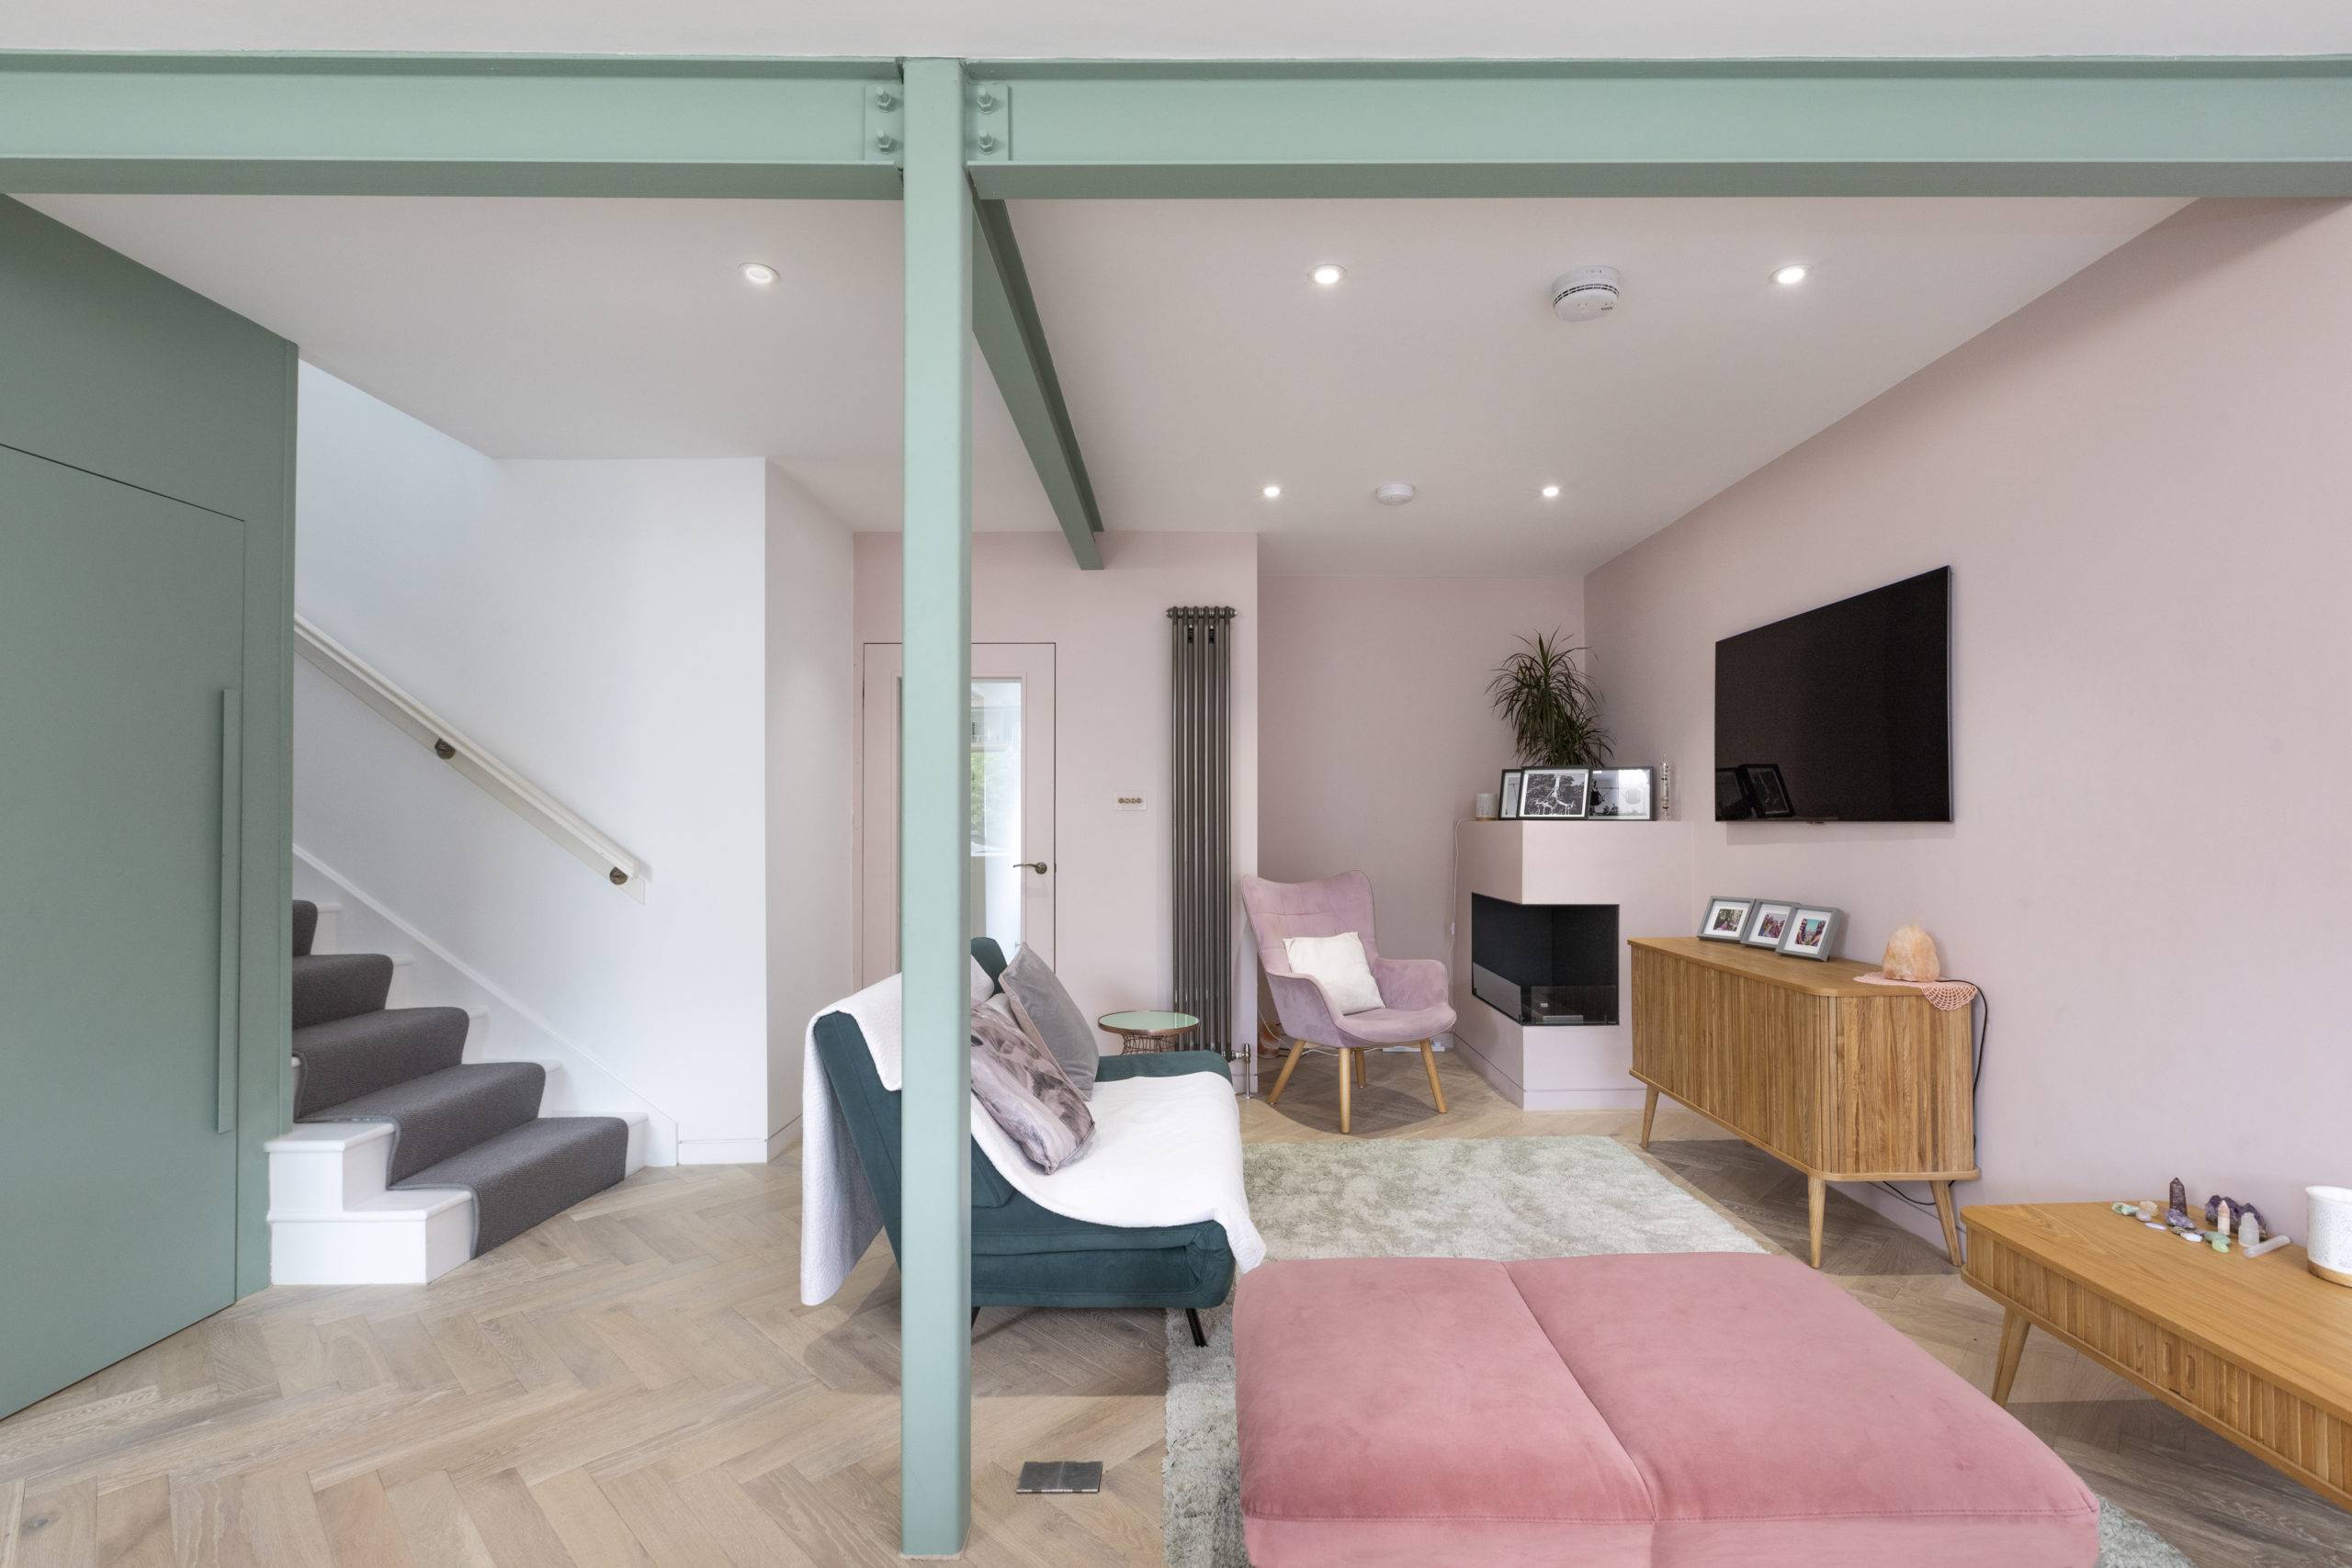 midcentury living room with pink and green accents, exposed industrial beams on ceiling